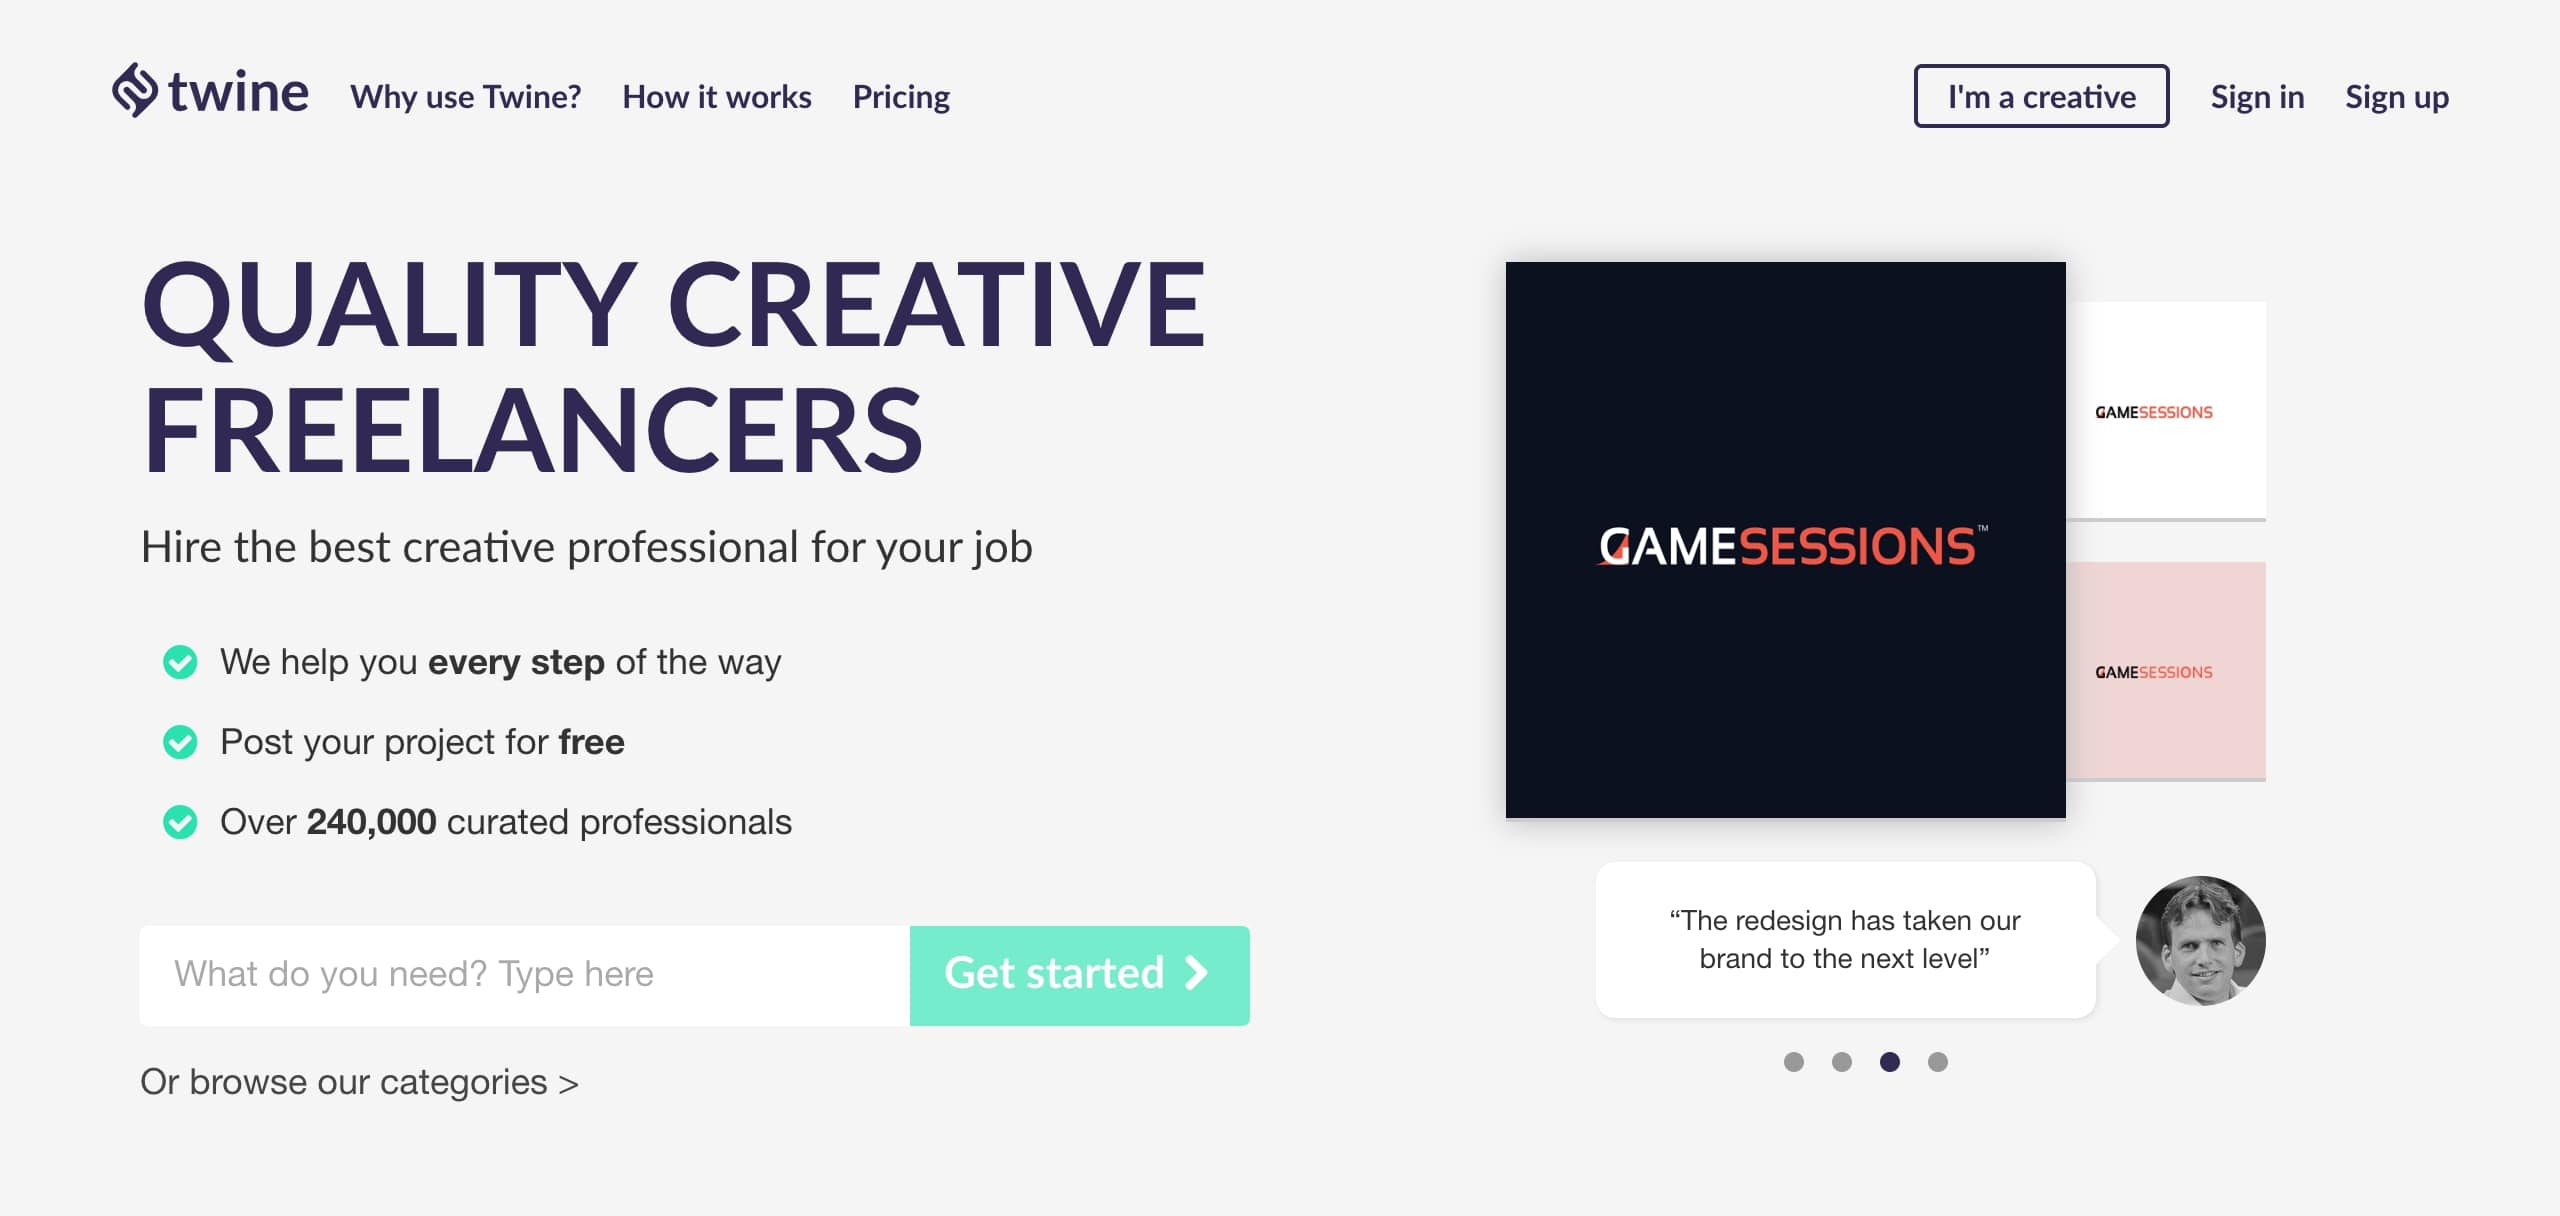 Jobs and Work from The Freelancer Toolkit for Creative and Digital Nomads